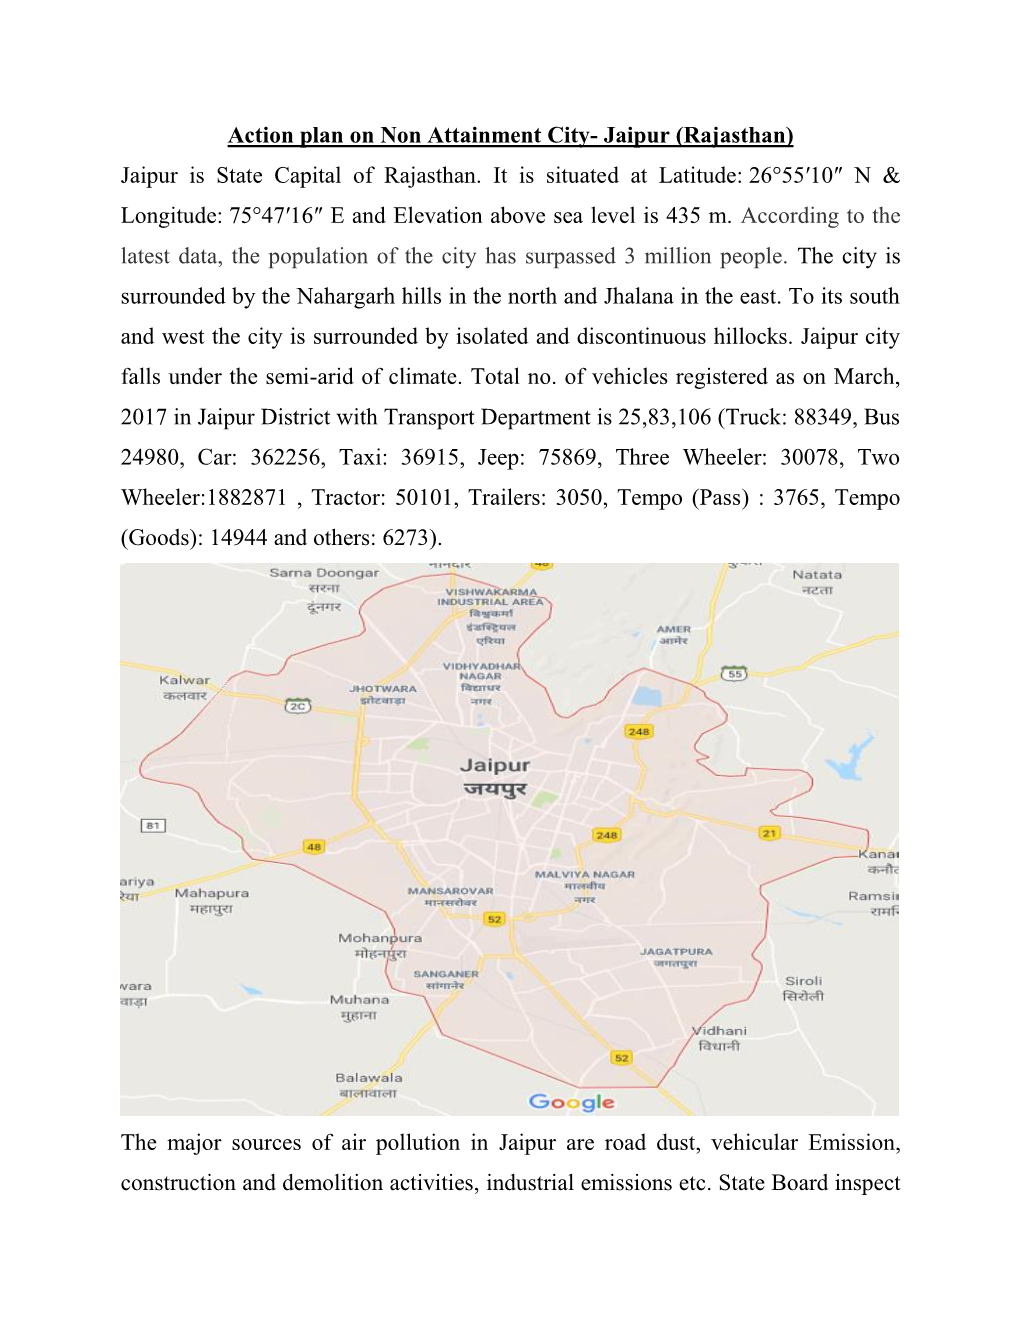 Action Plan on Non Attainment City- Jaipur (Rajasthan) Jaipur Is State Capital of Rajasthan